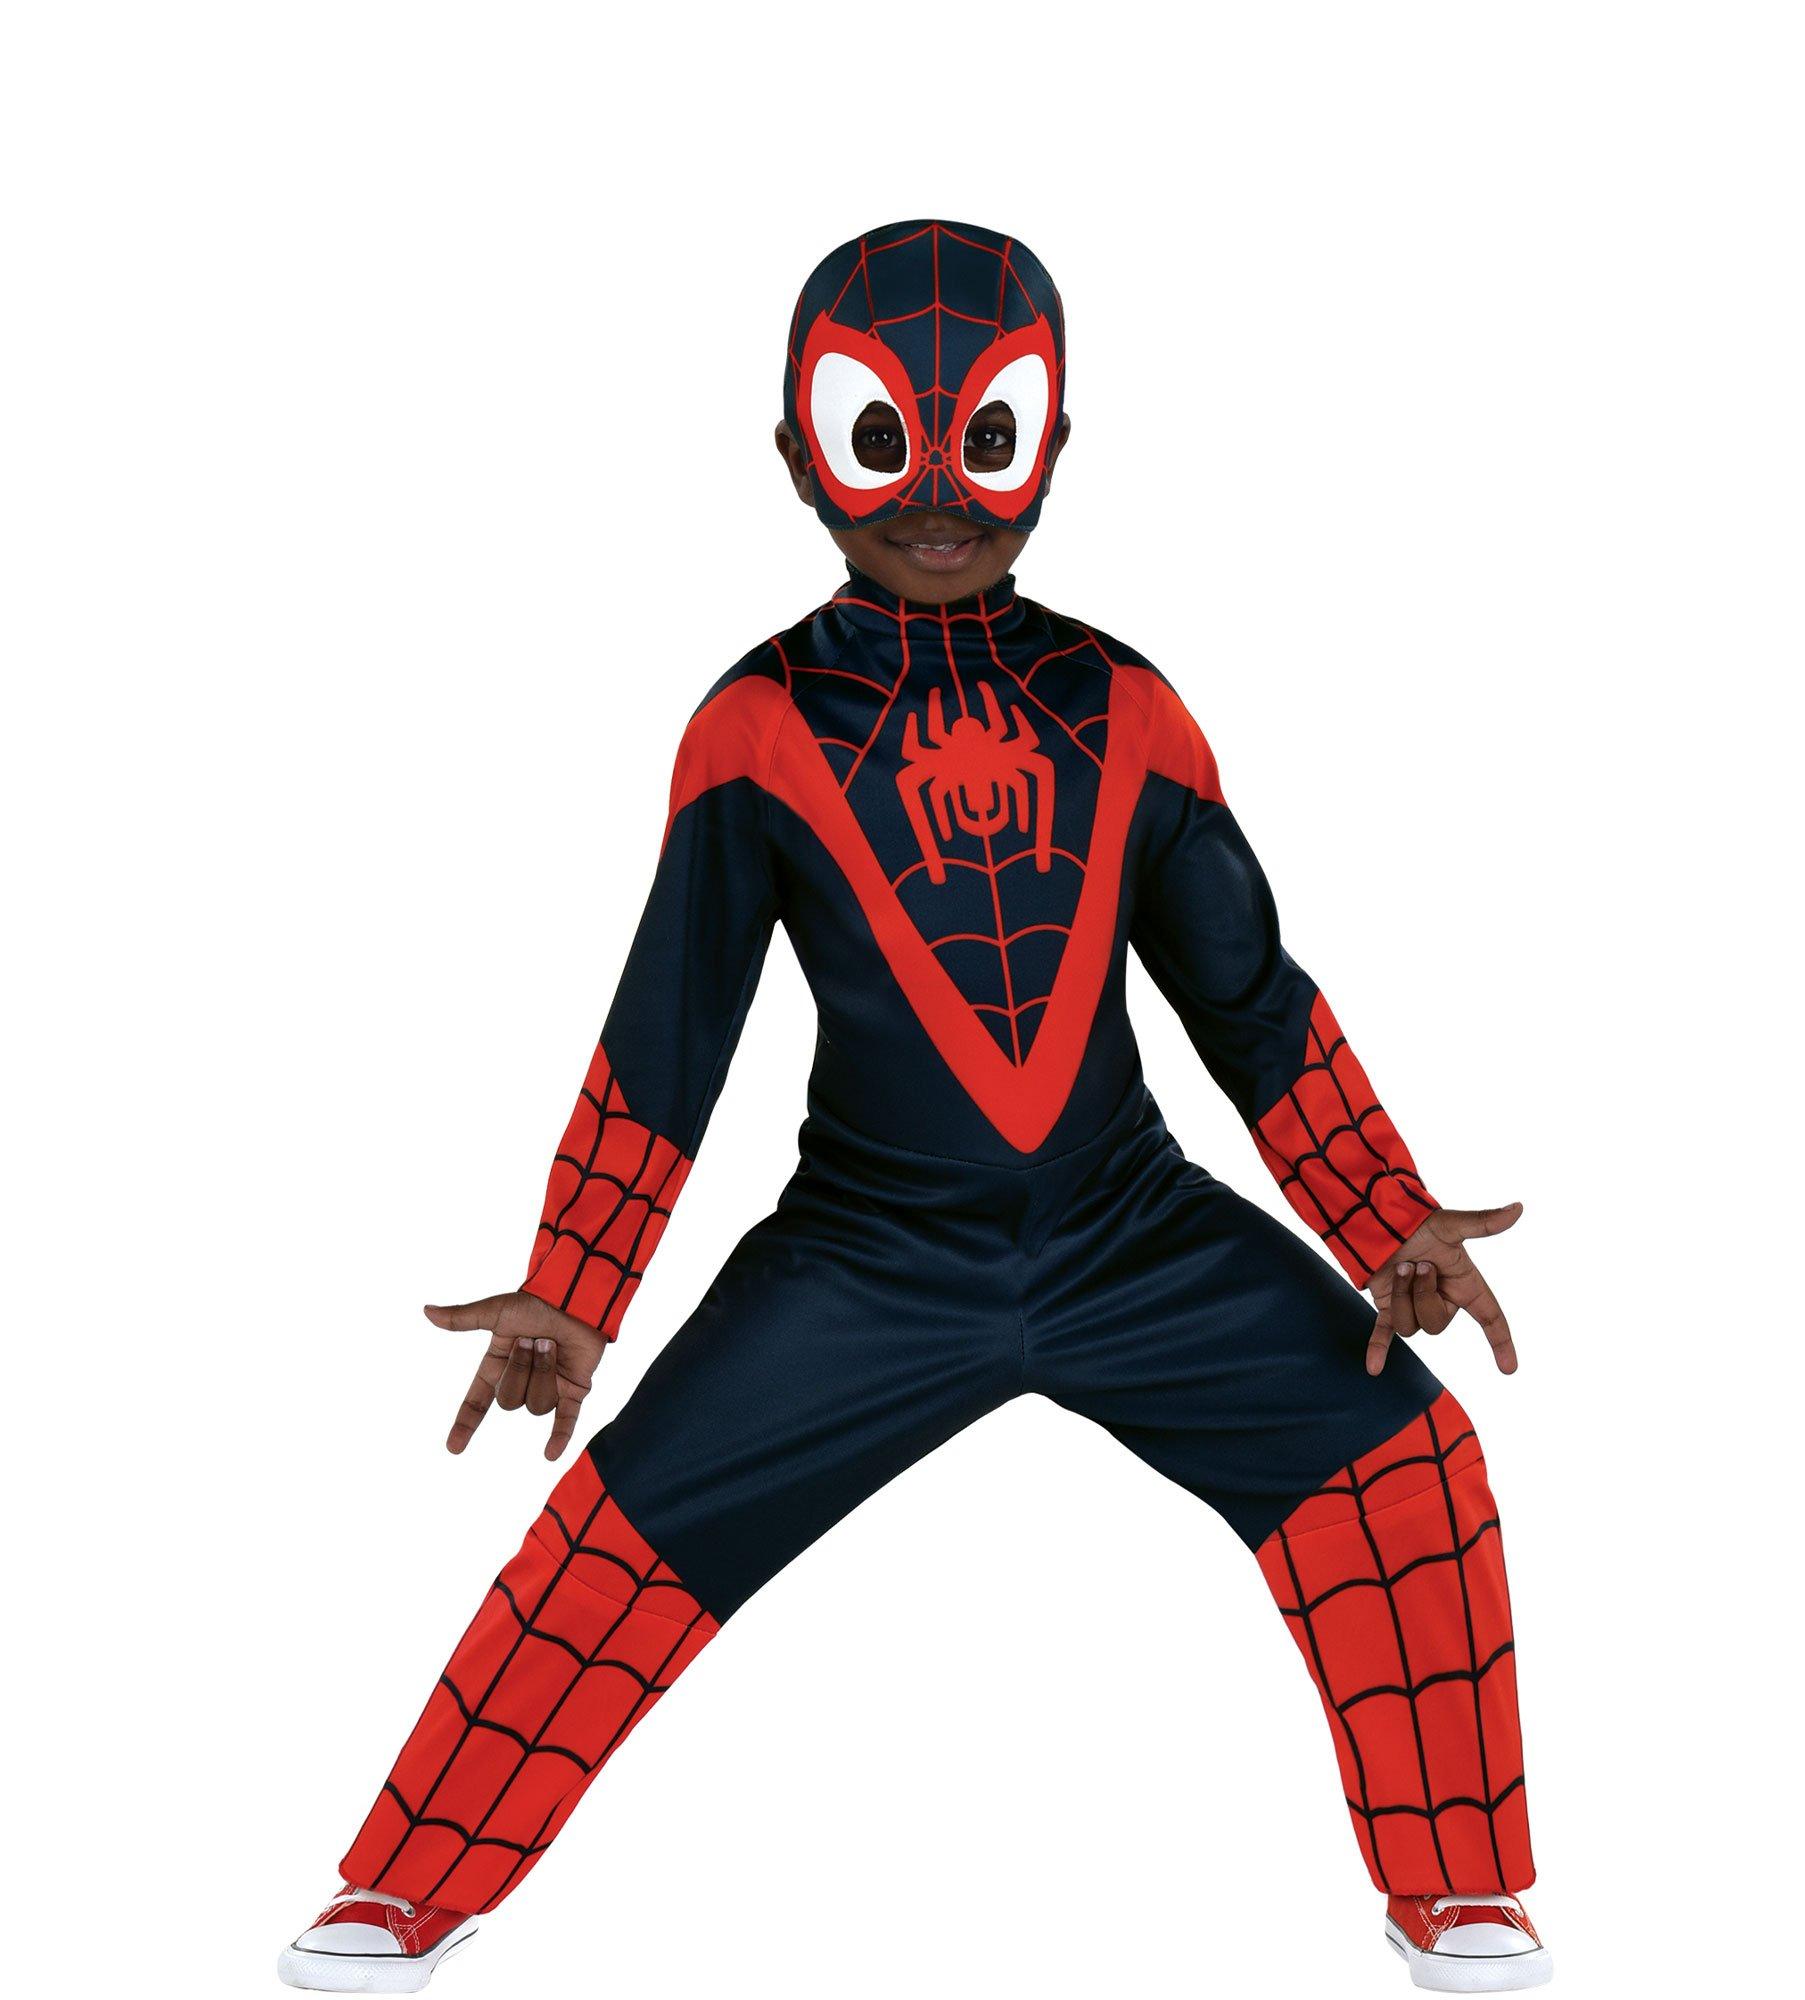 Holiday Gift Guide: Spider-Man and his Amazing Items